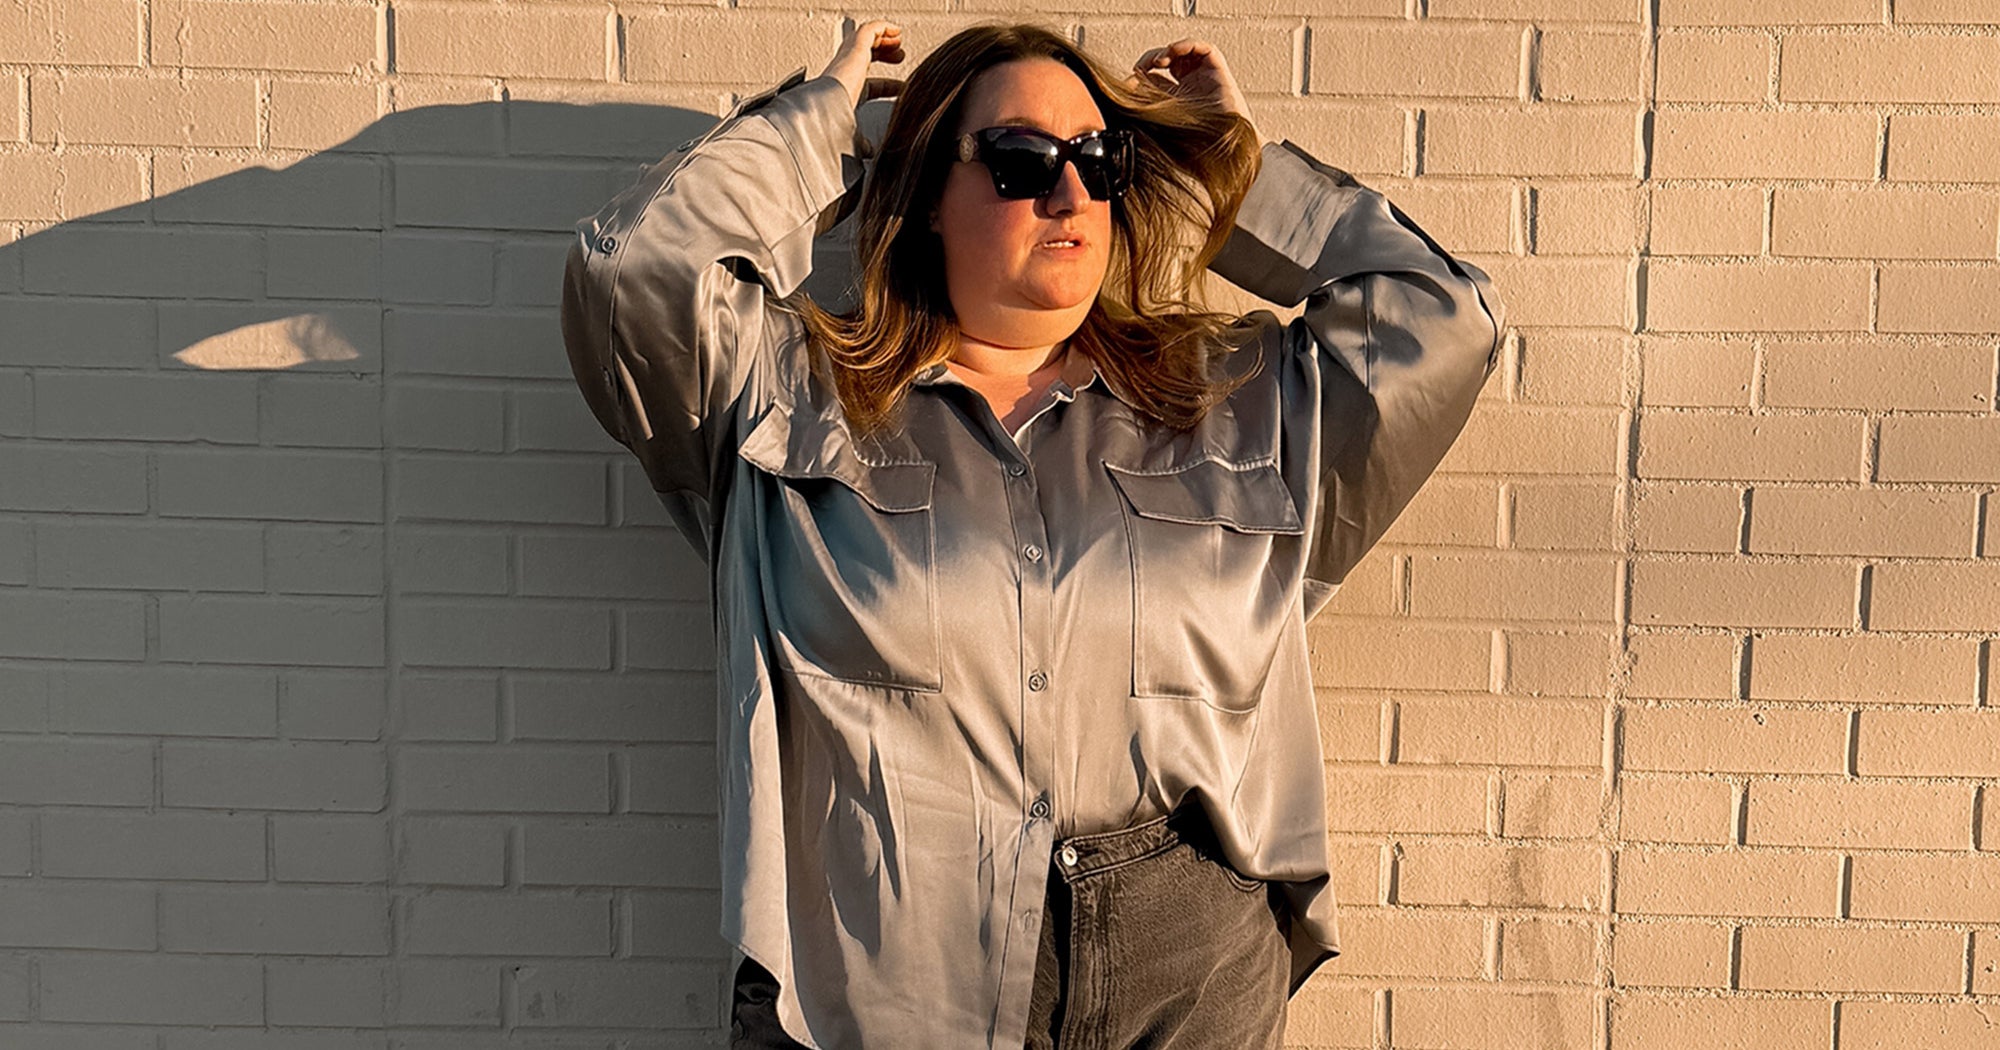 I Tried Abercrombie & Fitch’s Plus-Size Jeans — My Honest Review Of The Denim